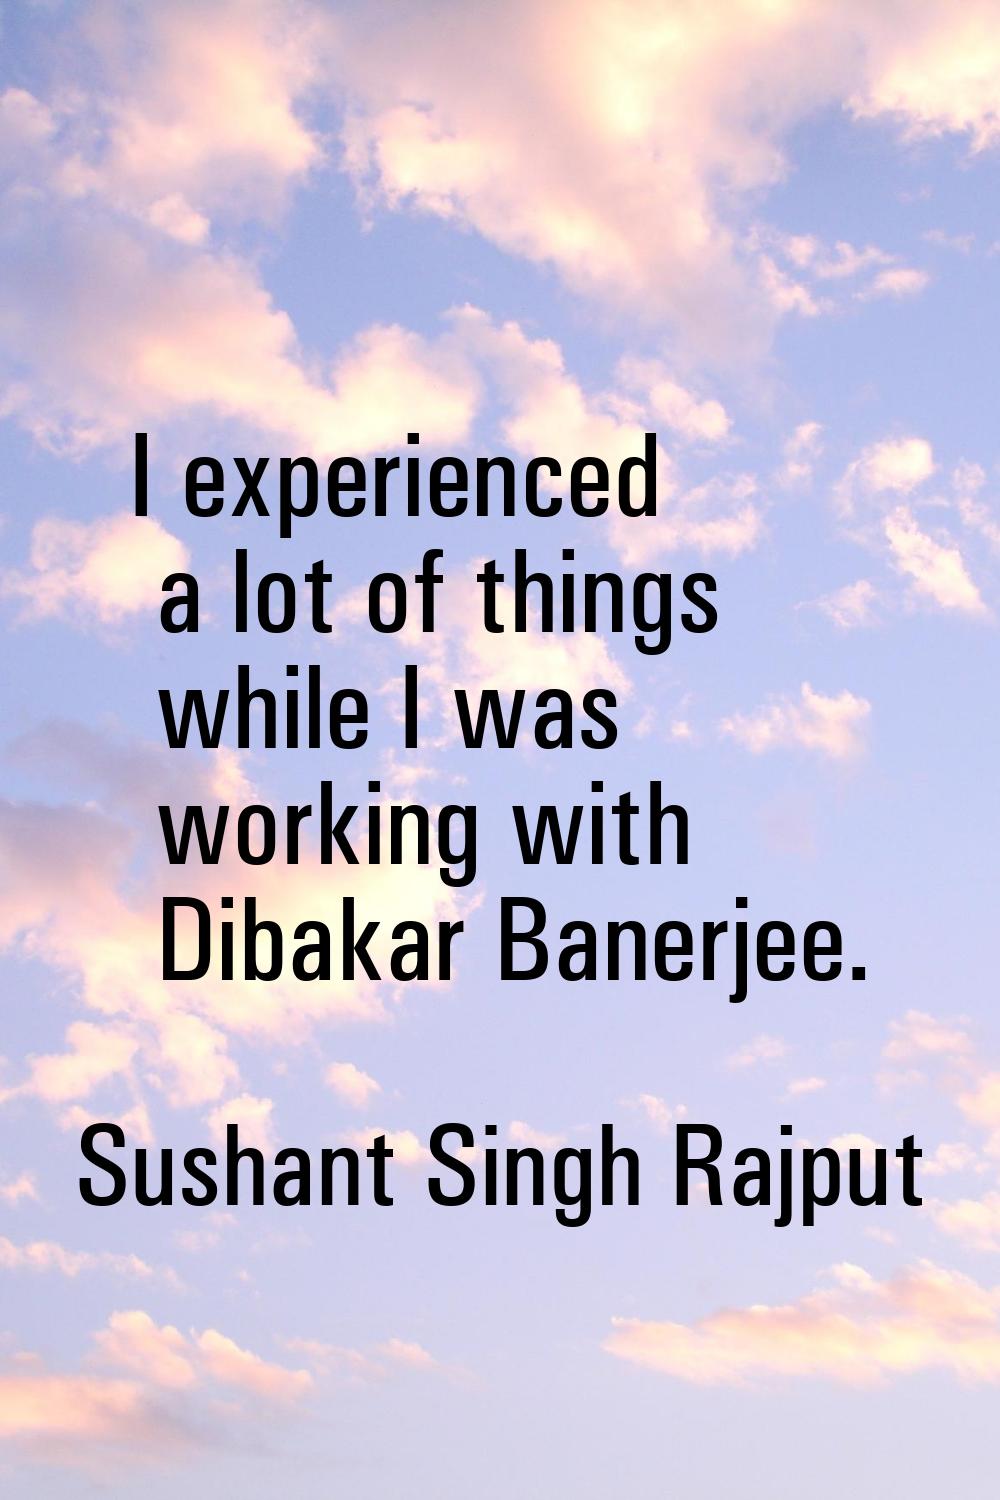 I experienced a lot of things while I was working with Dibakar Banerjee.